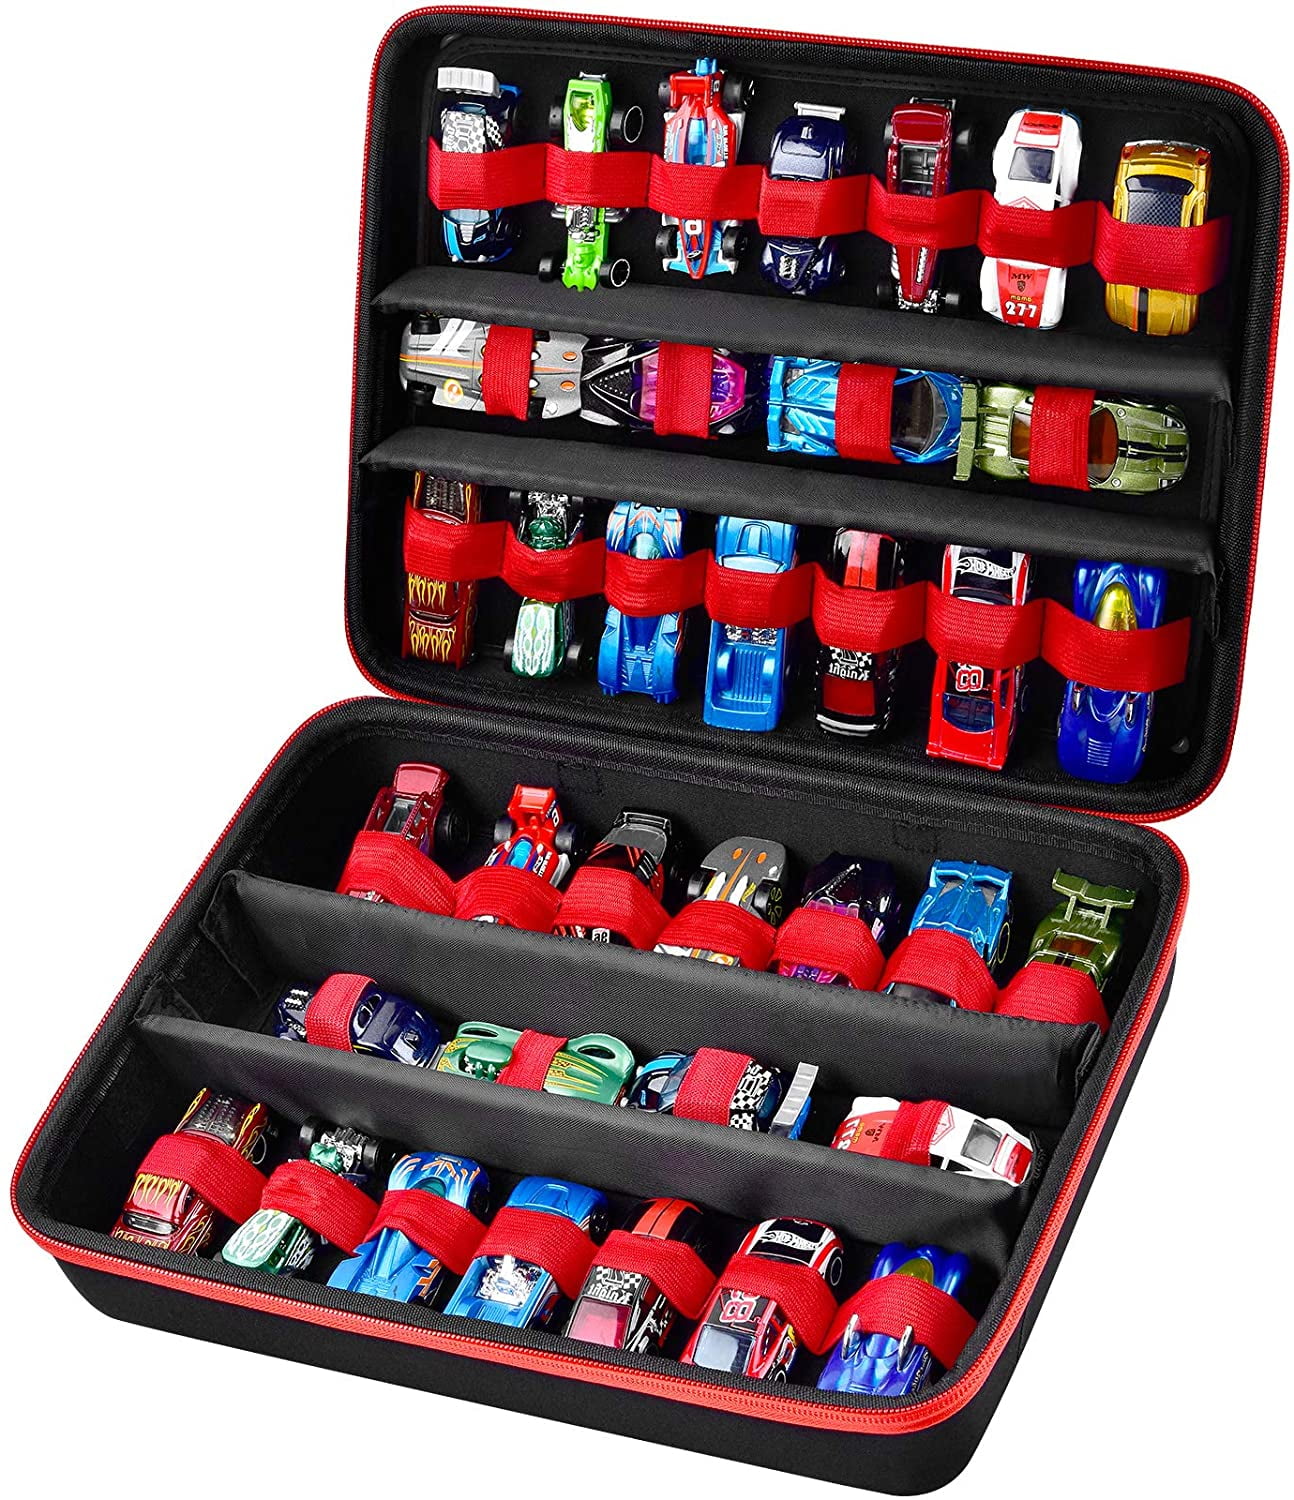 Mchoi Shockproof Carrying Case for Hot Wheels 20 Cars, Toy Car Organizer  for Your Matchbox Cars Storage, Case Only